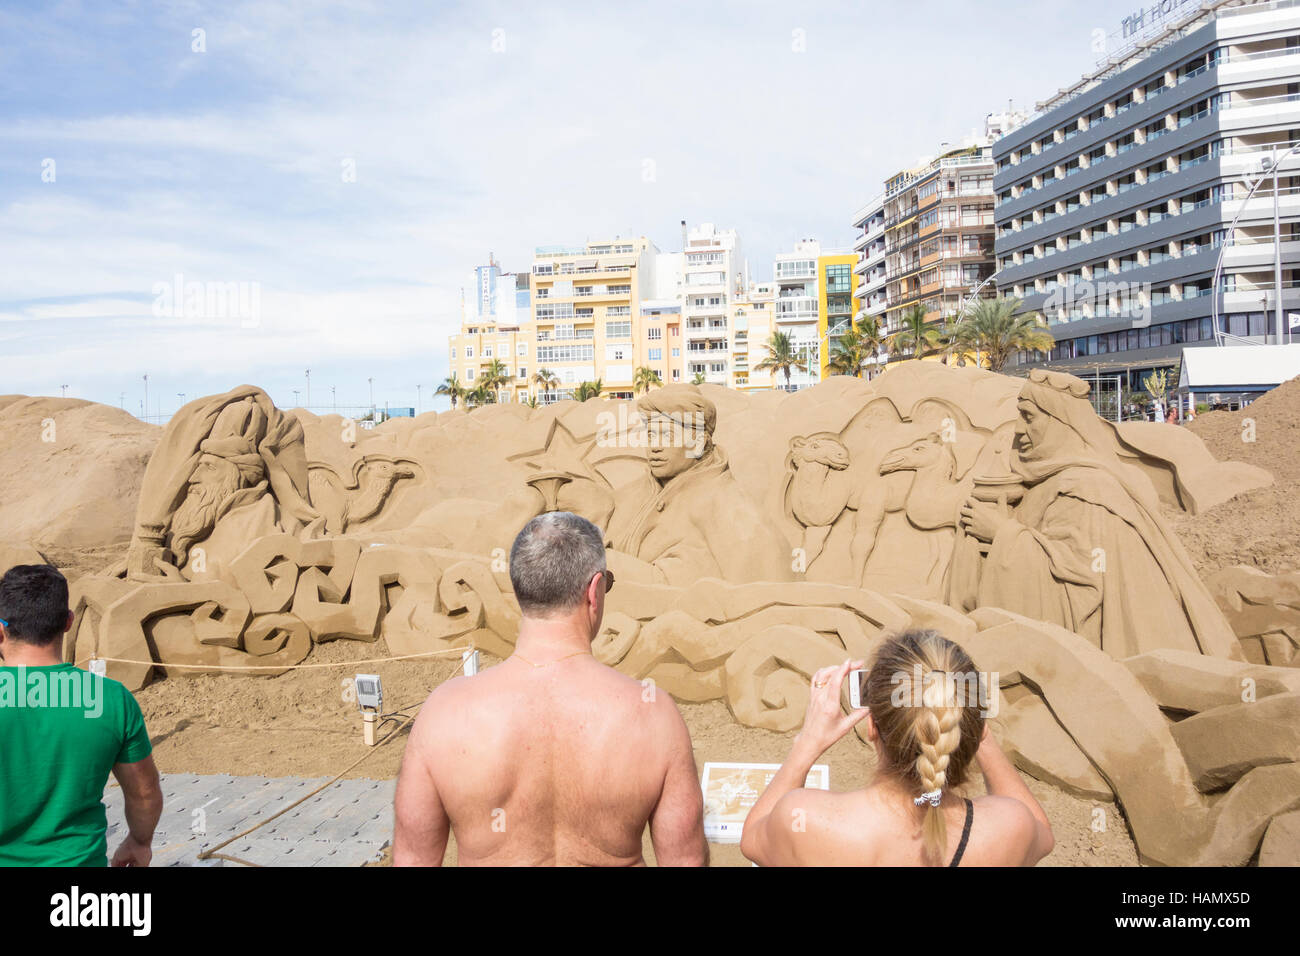 Las Palmas, Gran Canaria, Canary Islands, Spain. 2nd December, 2016. Locals and  tourists visiting the huge (75x30metre) sand sculptured nativity scene on the city beach with with mid morning temperature a sizzling 28 degrees Celcius. Credit:  Alan Dawson News/Alamy Live News Stock Photo